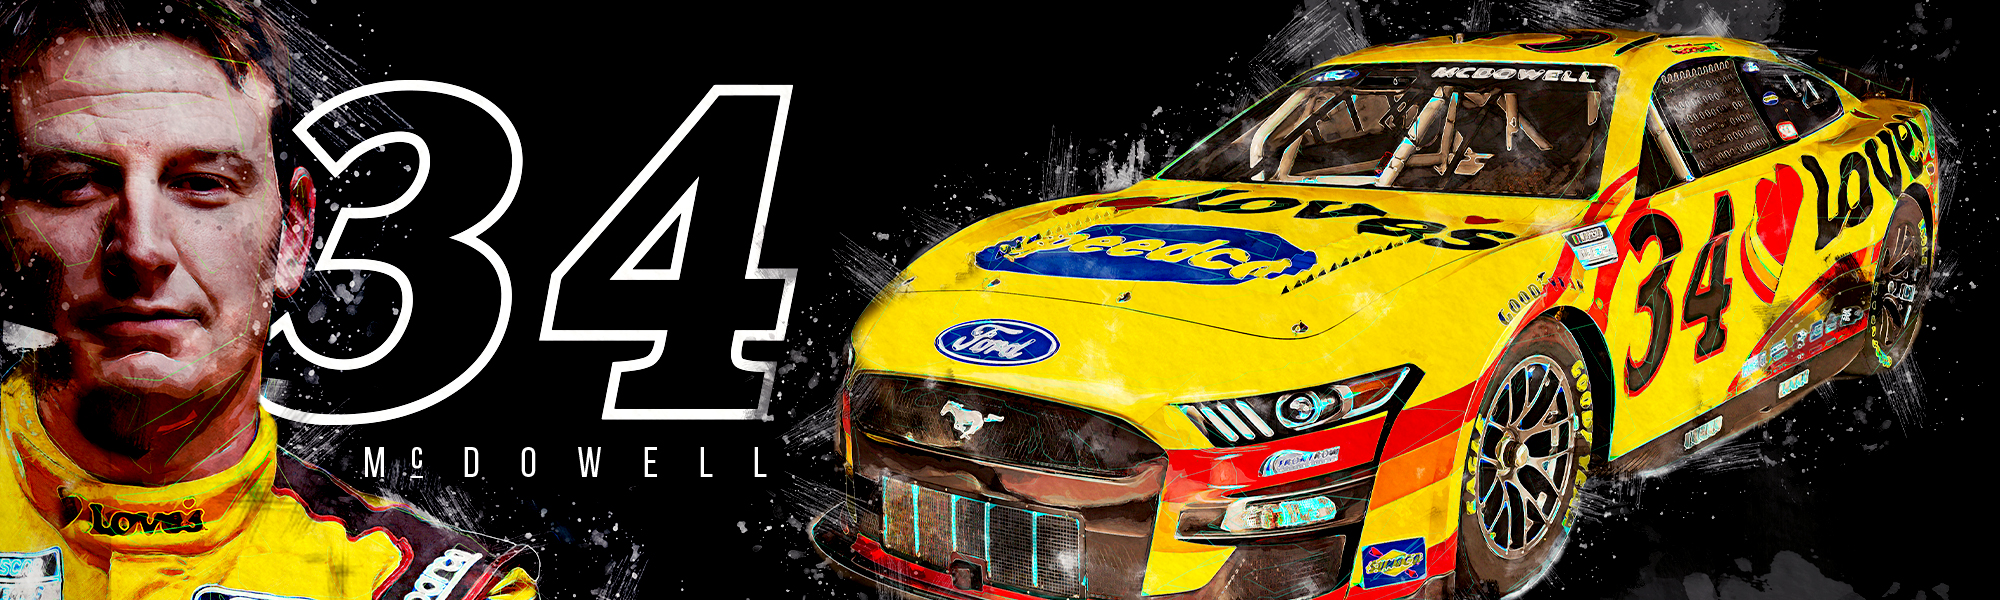 A graphic of Michael McDowell and the No. 34 car